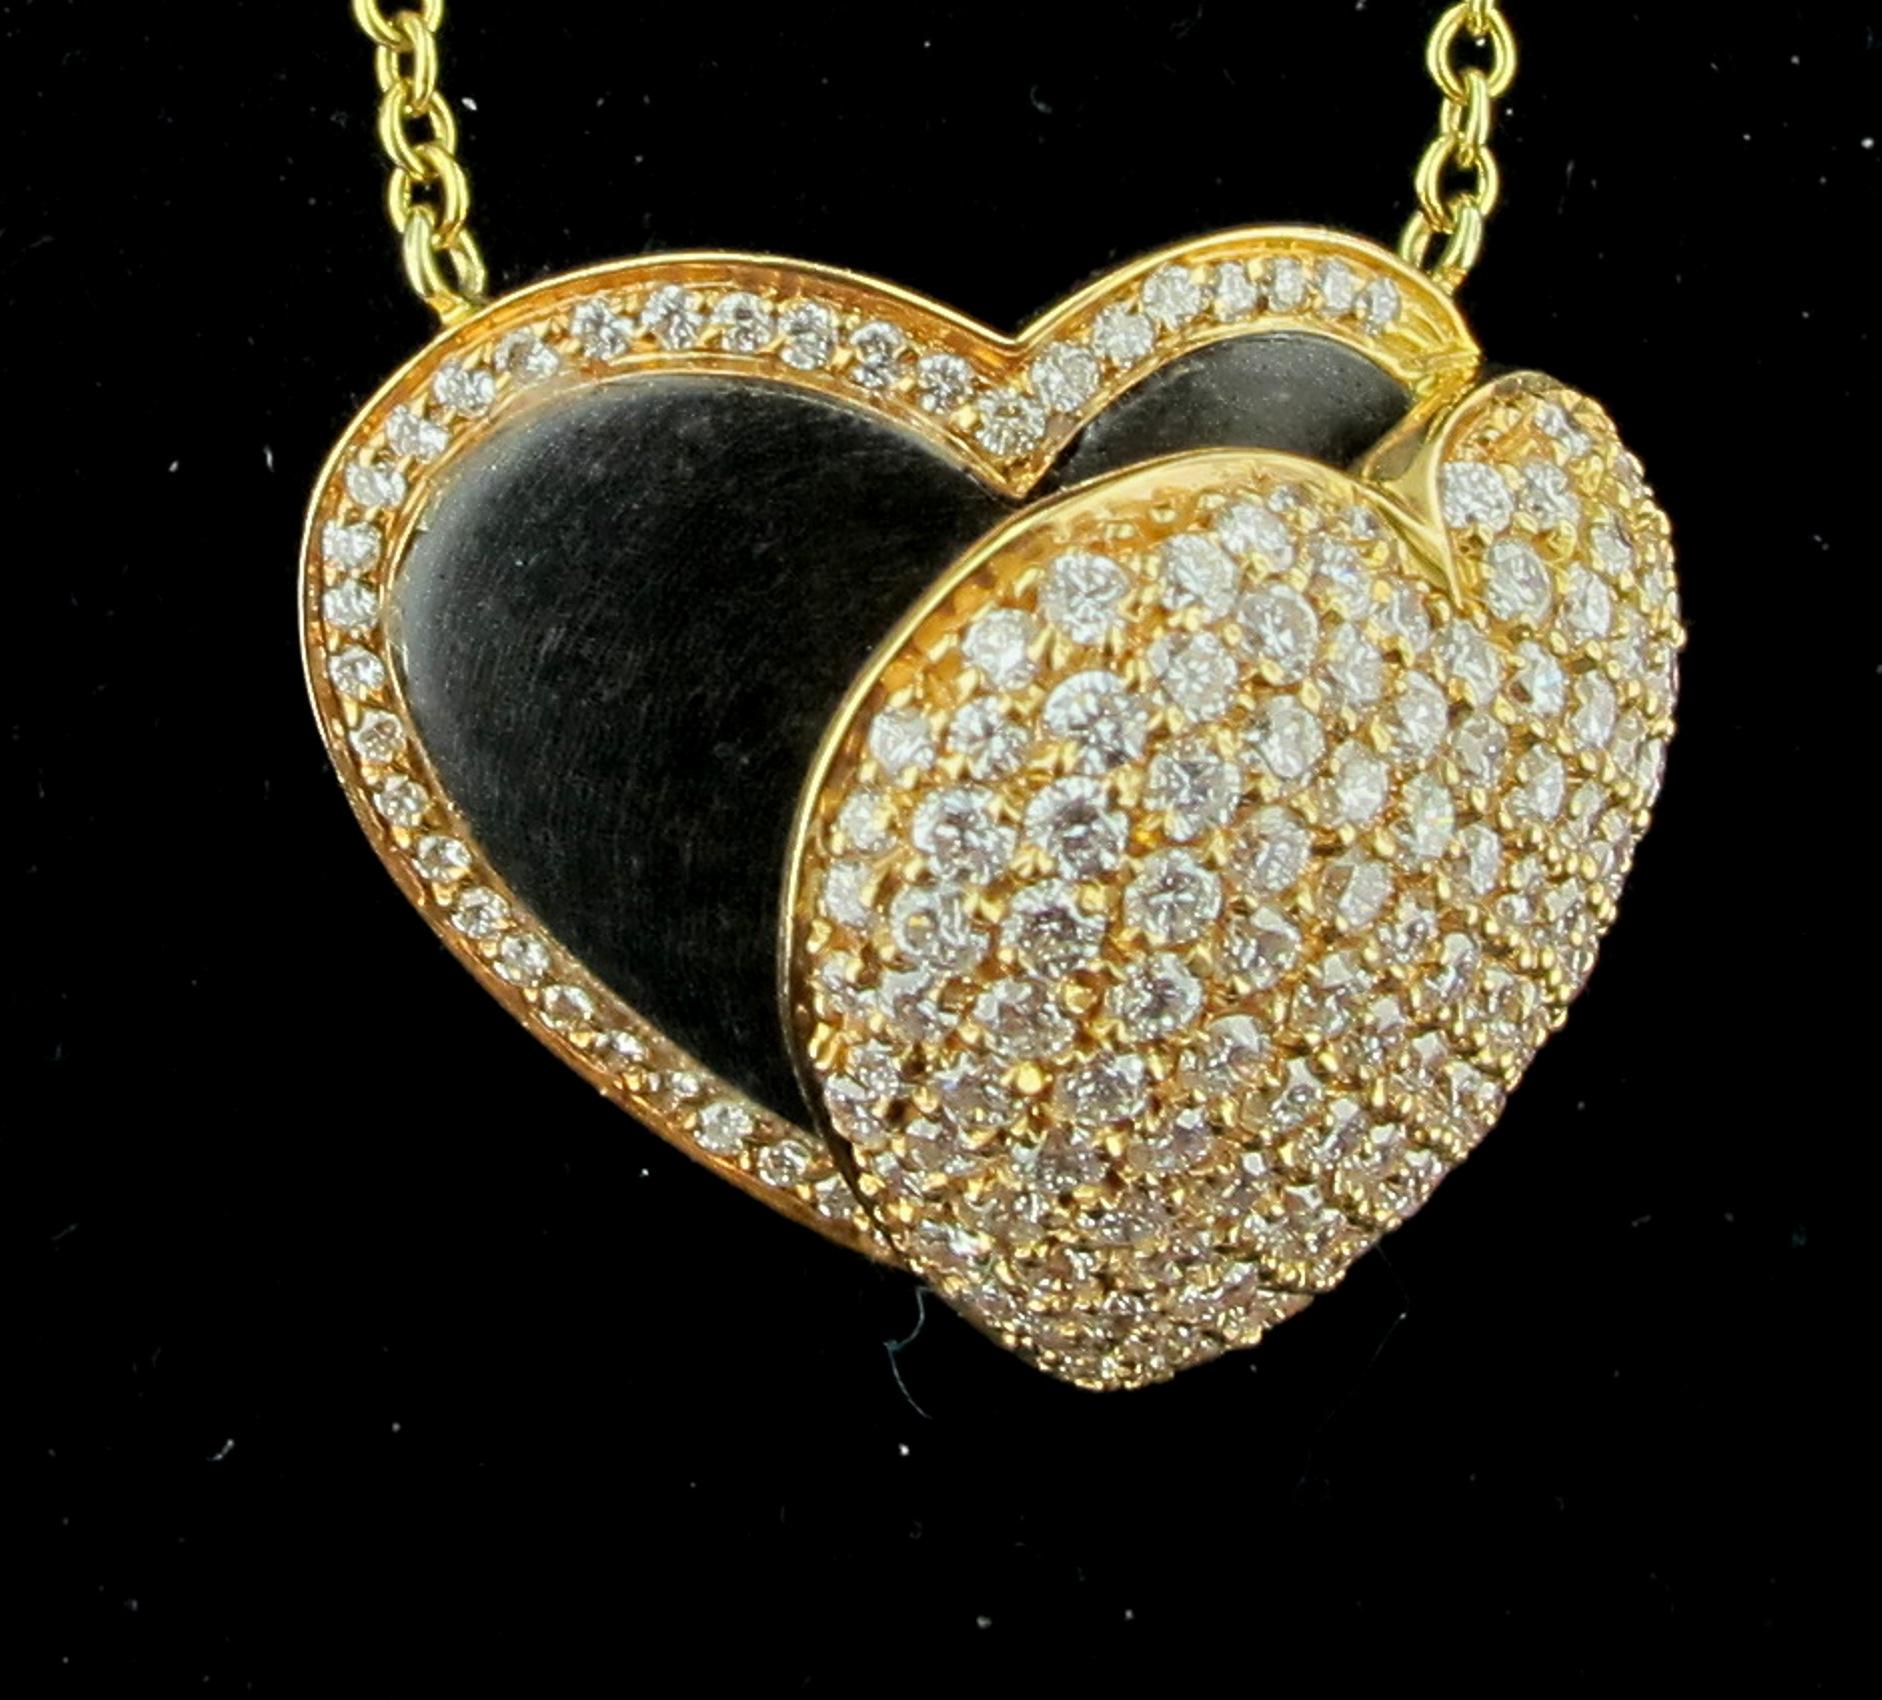 Set in 18 karat rose & yellow gold is a heart pendant with 180 round brilliant cut diamonds.  The open center is made of wood.  The total diamond weight is 1.85 carats G color, VS clarity. 17 grams of gold.